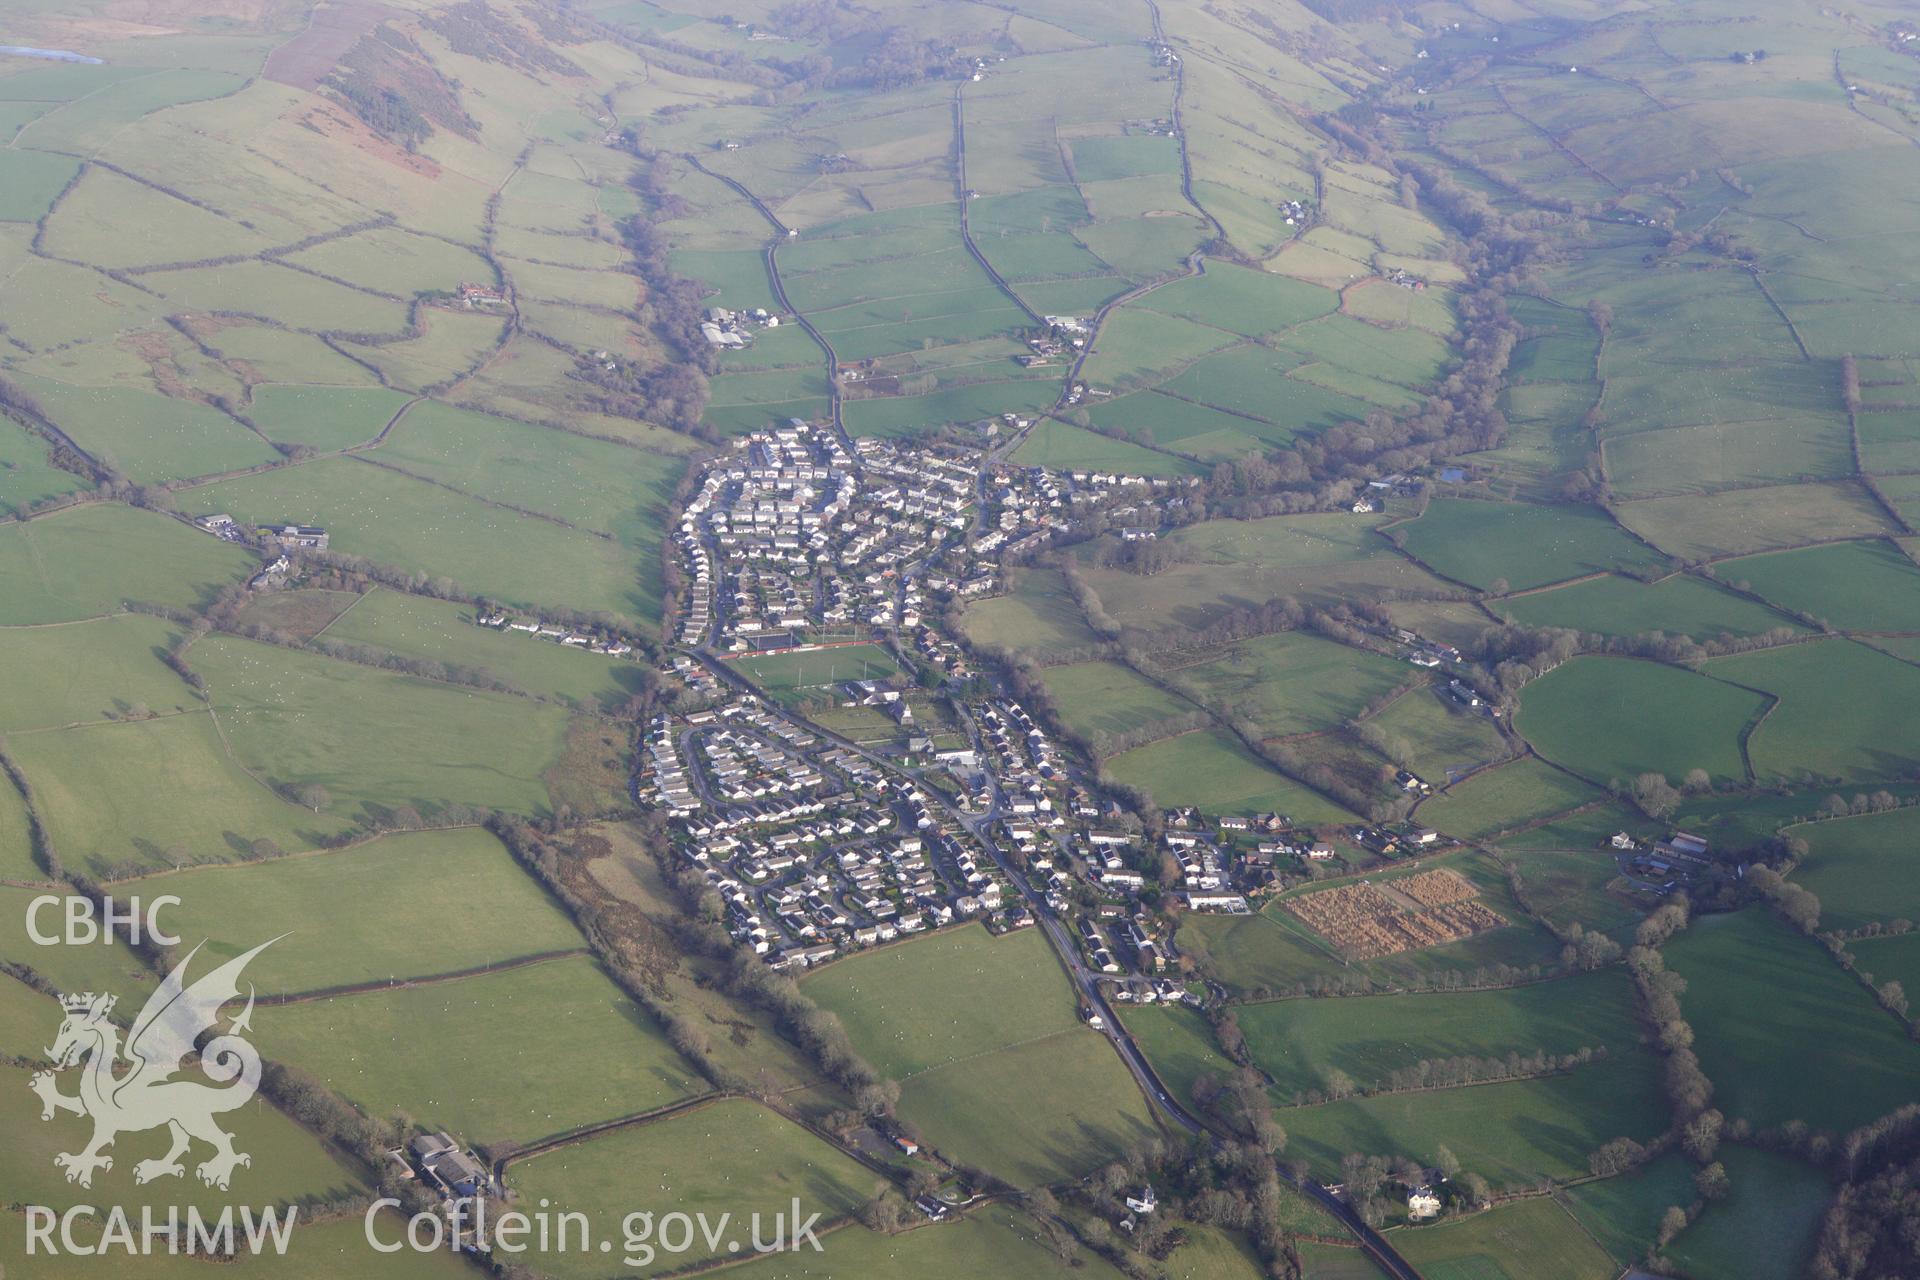 RCAHMW colour oblique photograph of Penrhyncoch Village. Taken by Toby Driver on 07/02/2012.